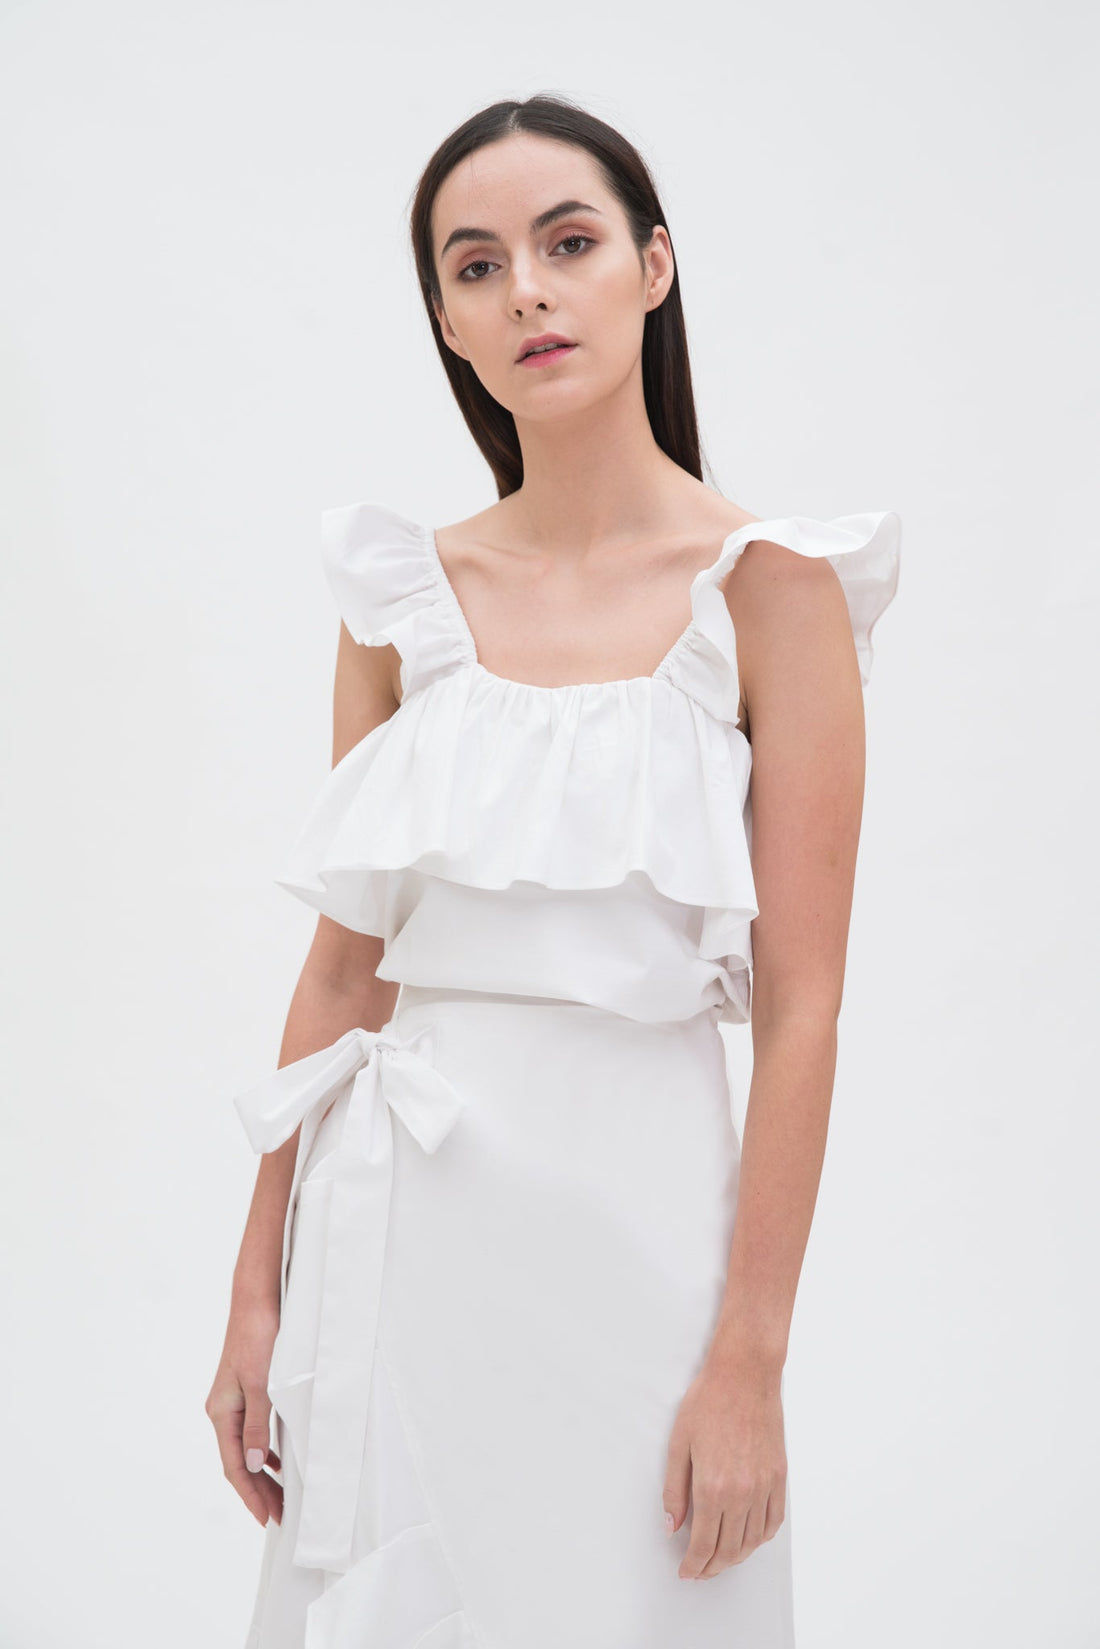 A woman is wearing a white ruffled scrappy dress.